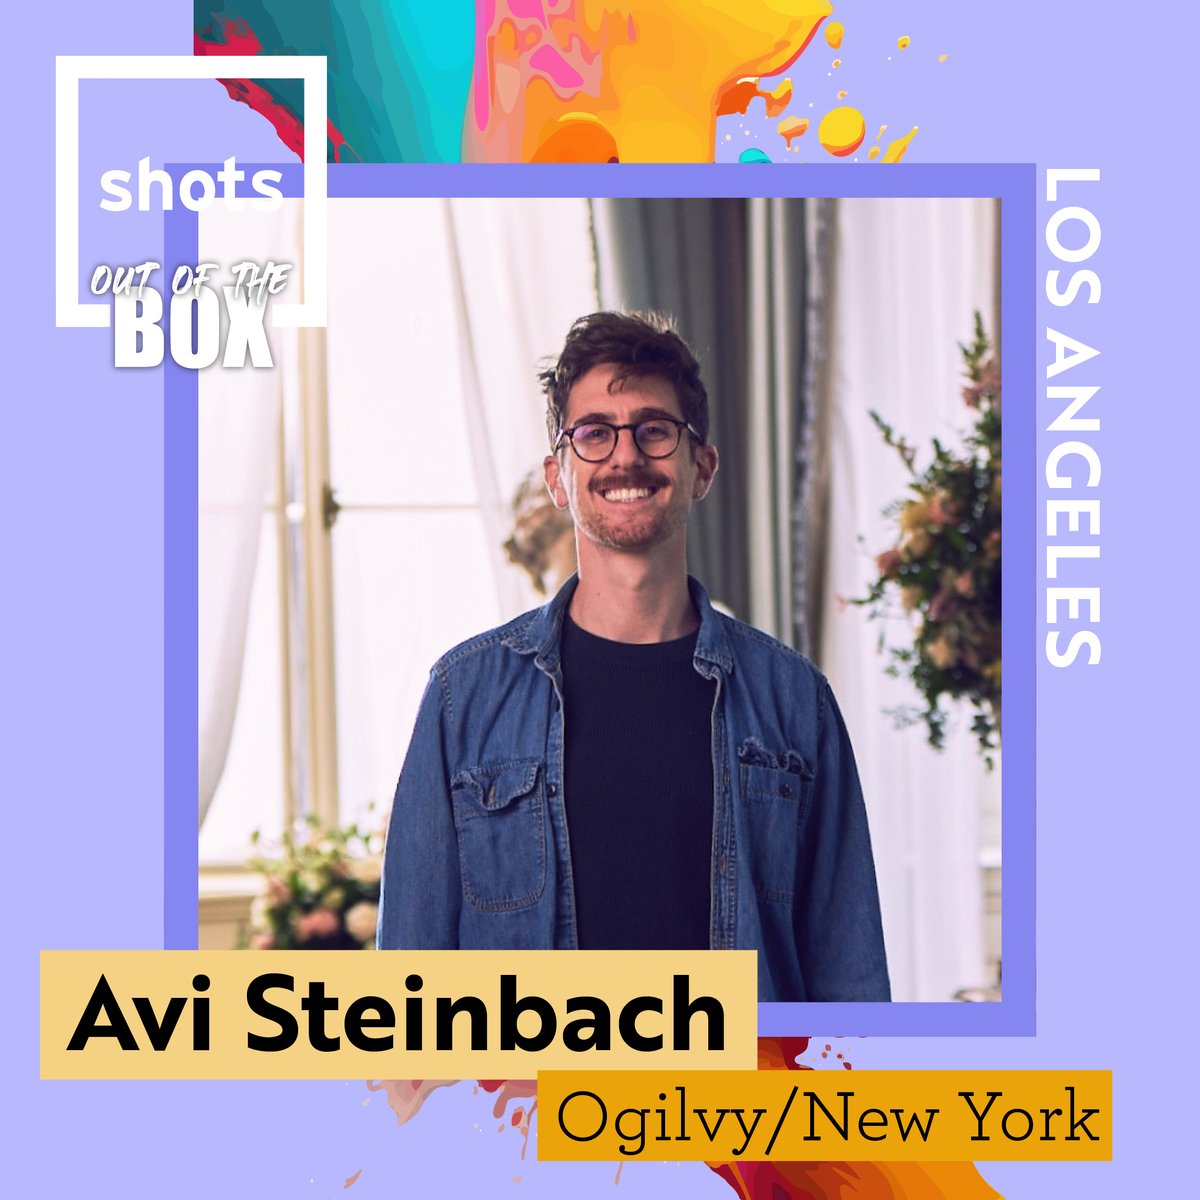 Join the @OgilvyNY #Creatives, Avi Steinbach & Alex Holm, behind CeraVe's Super Bowl smash hit starring Michael Cera at @shotscreative's Out of the Box, a one-day event for the advertising community exploring the craft of creativity. Details: okt.to/W2PCMk